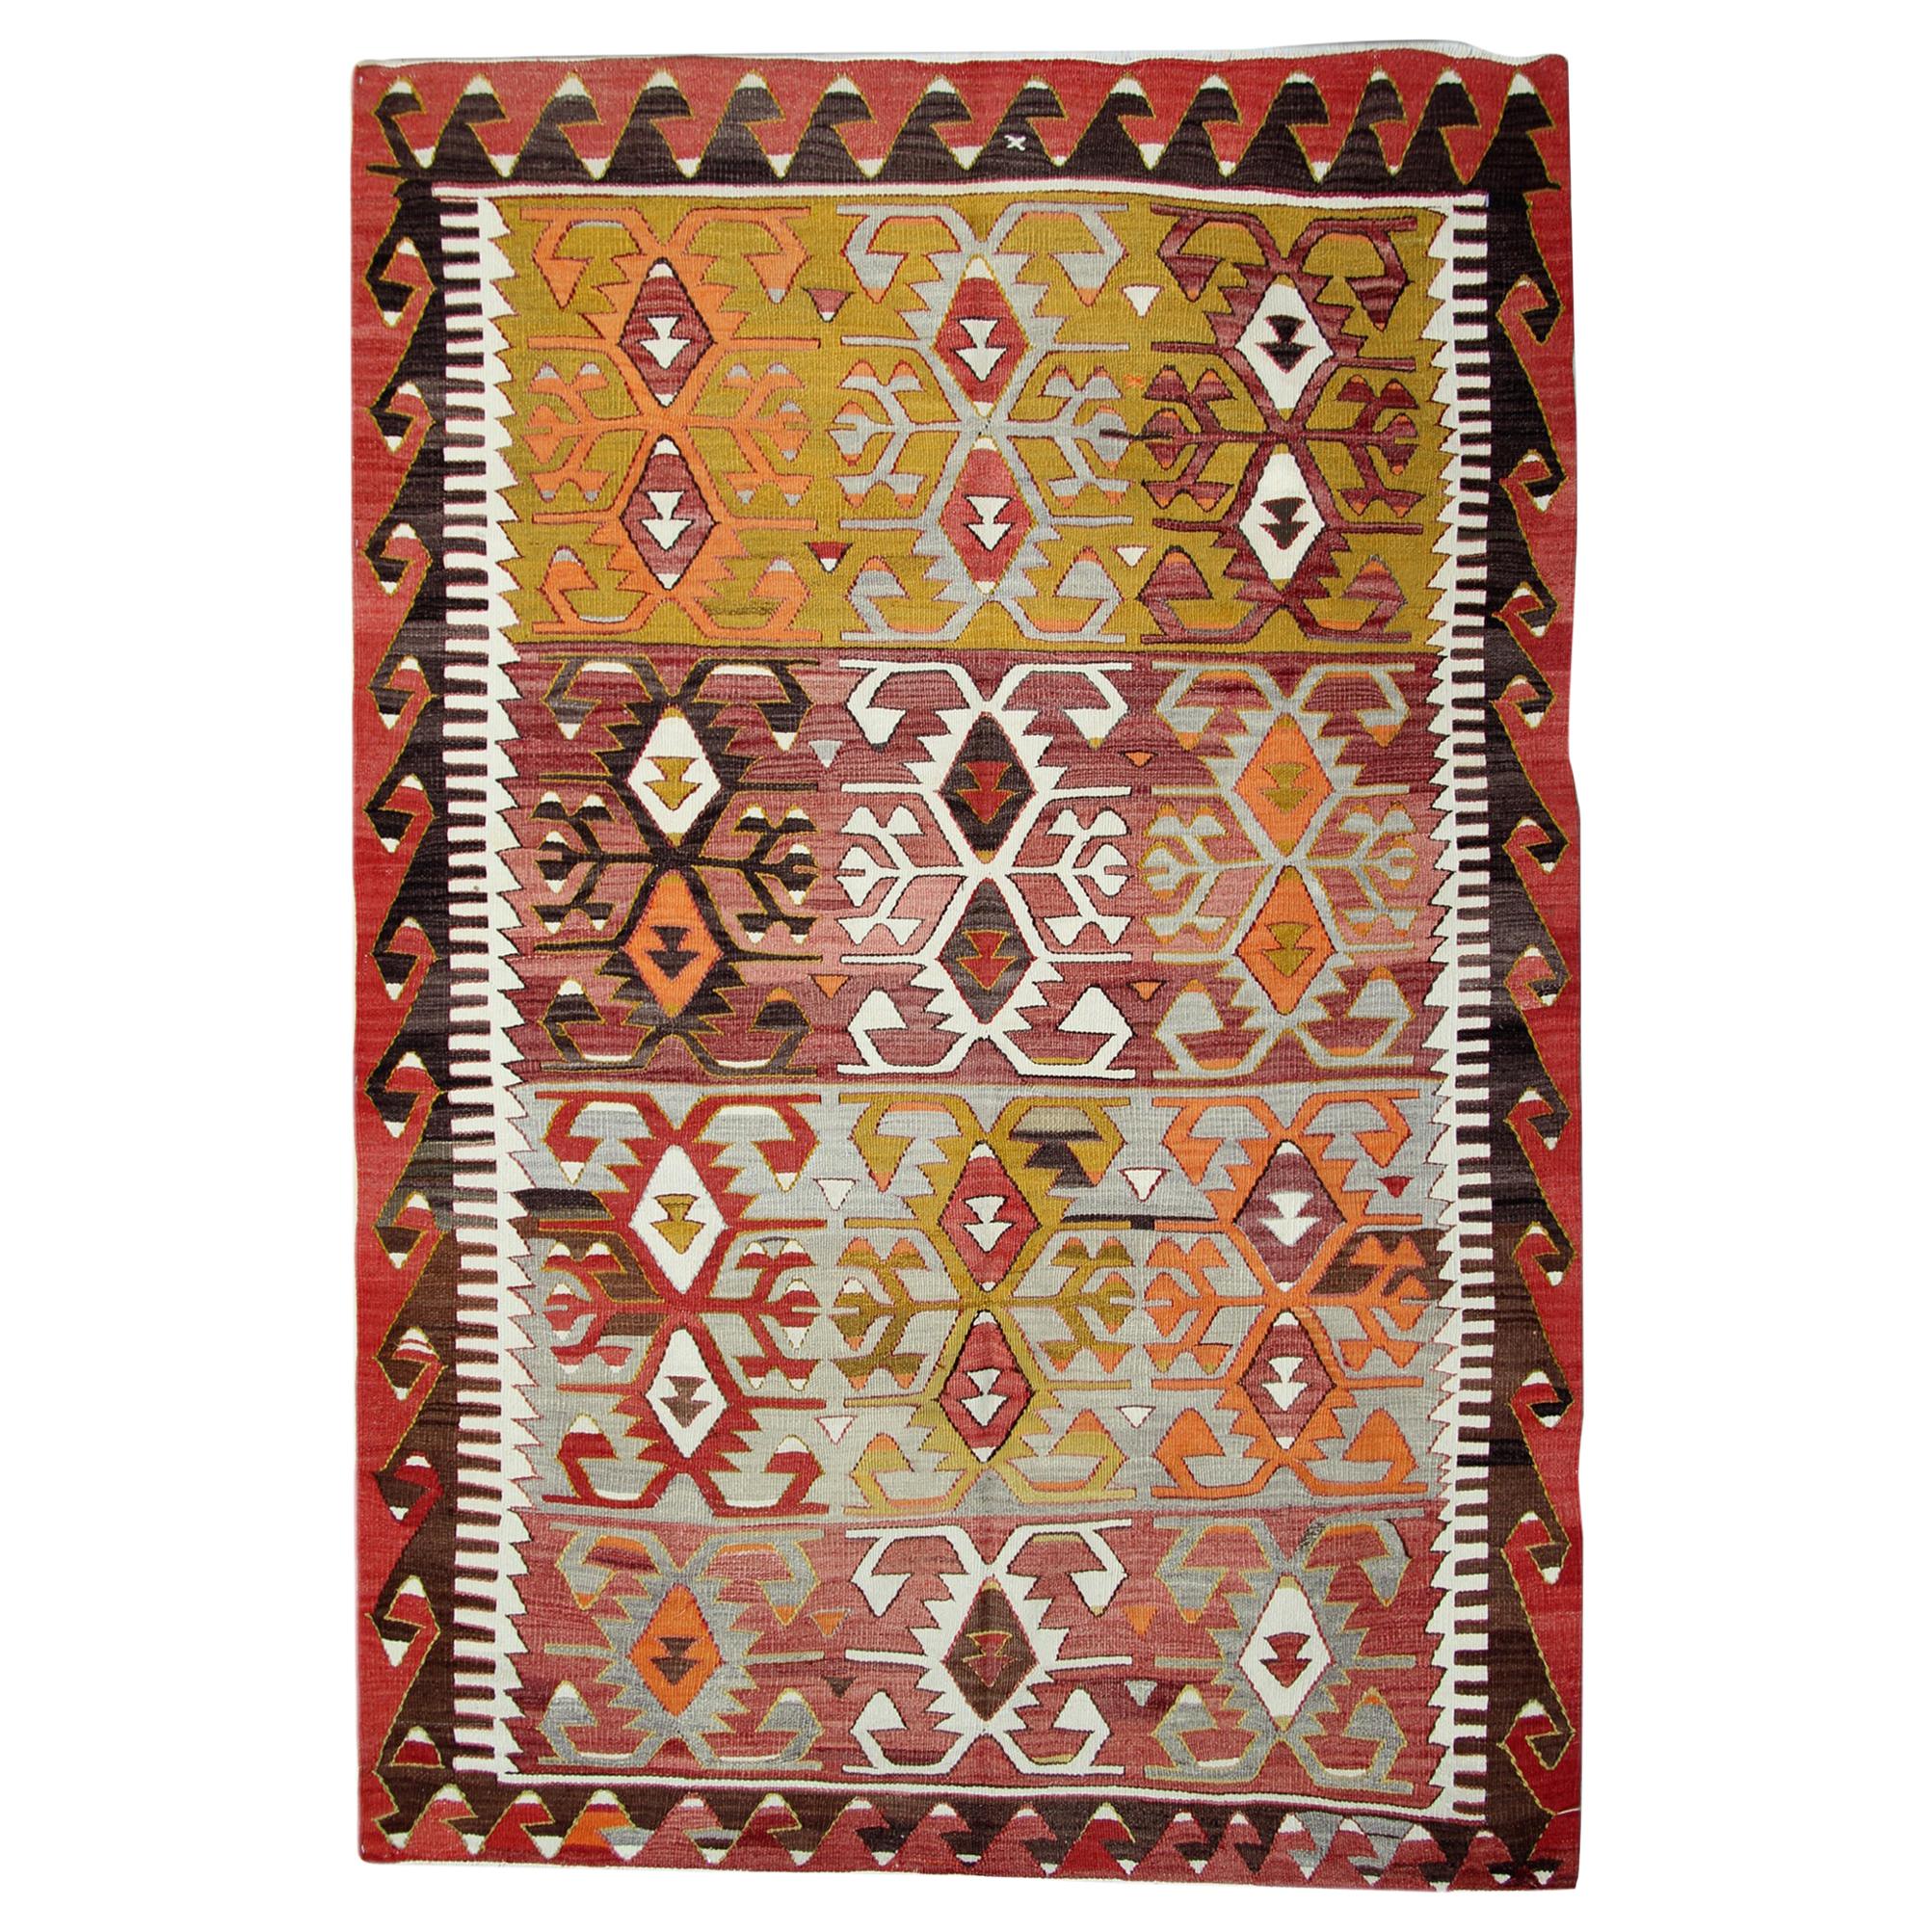 Antique Kilim Rugs, Traditional Oriental Rugs, Turkish Handmade Carpet for Sale For Sale